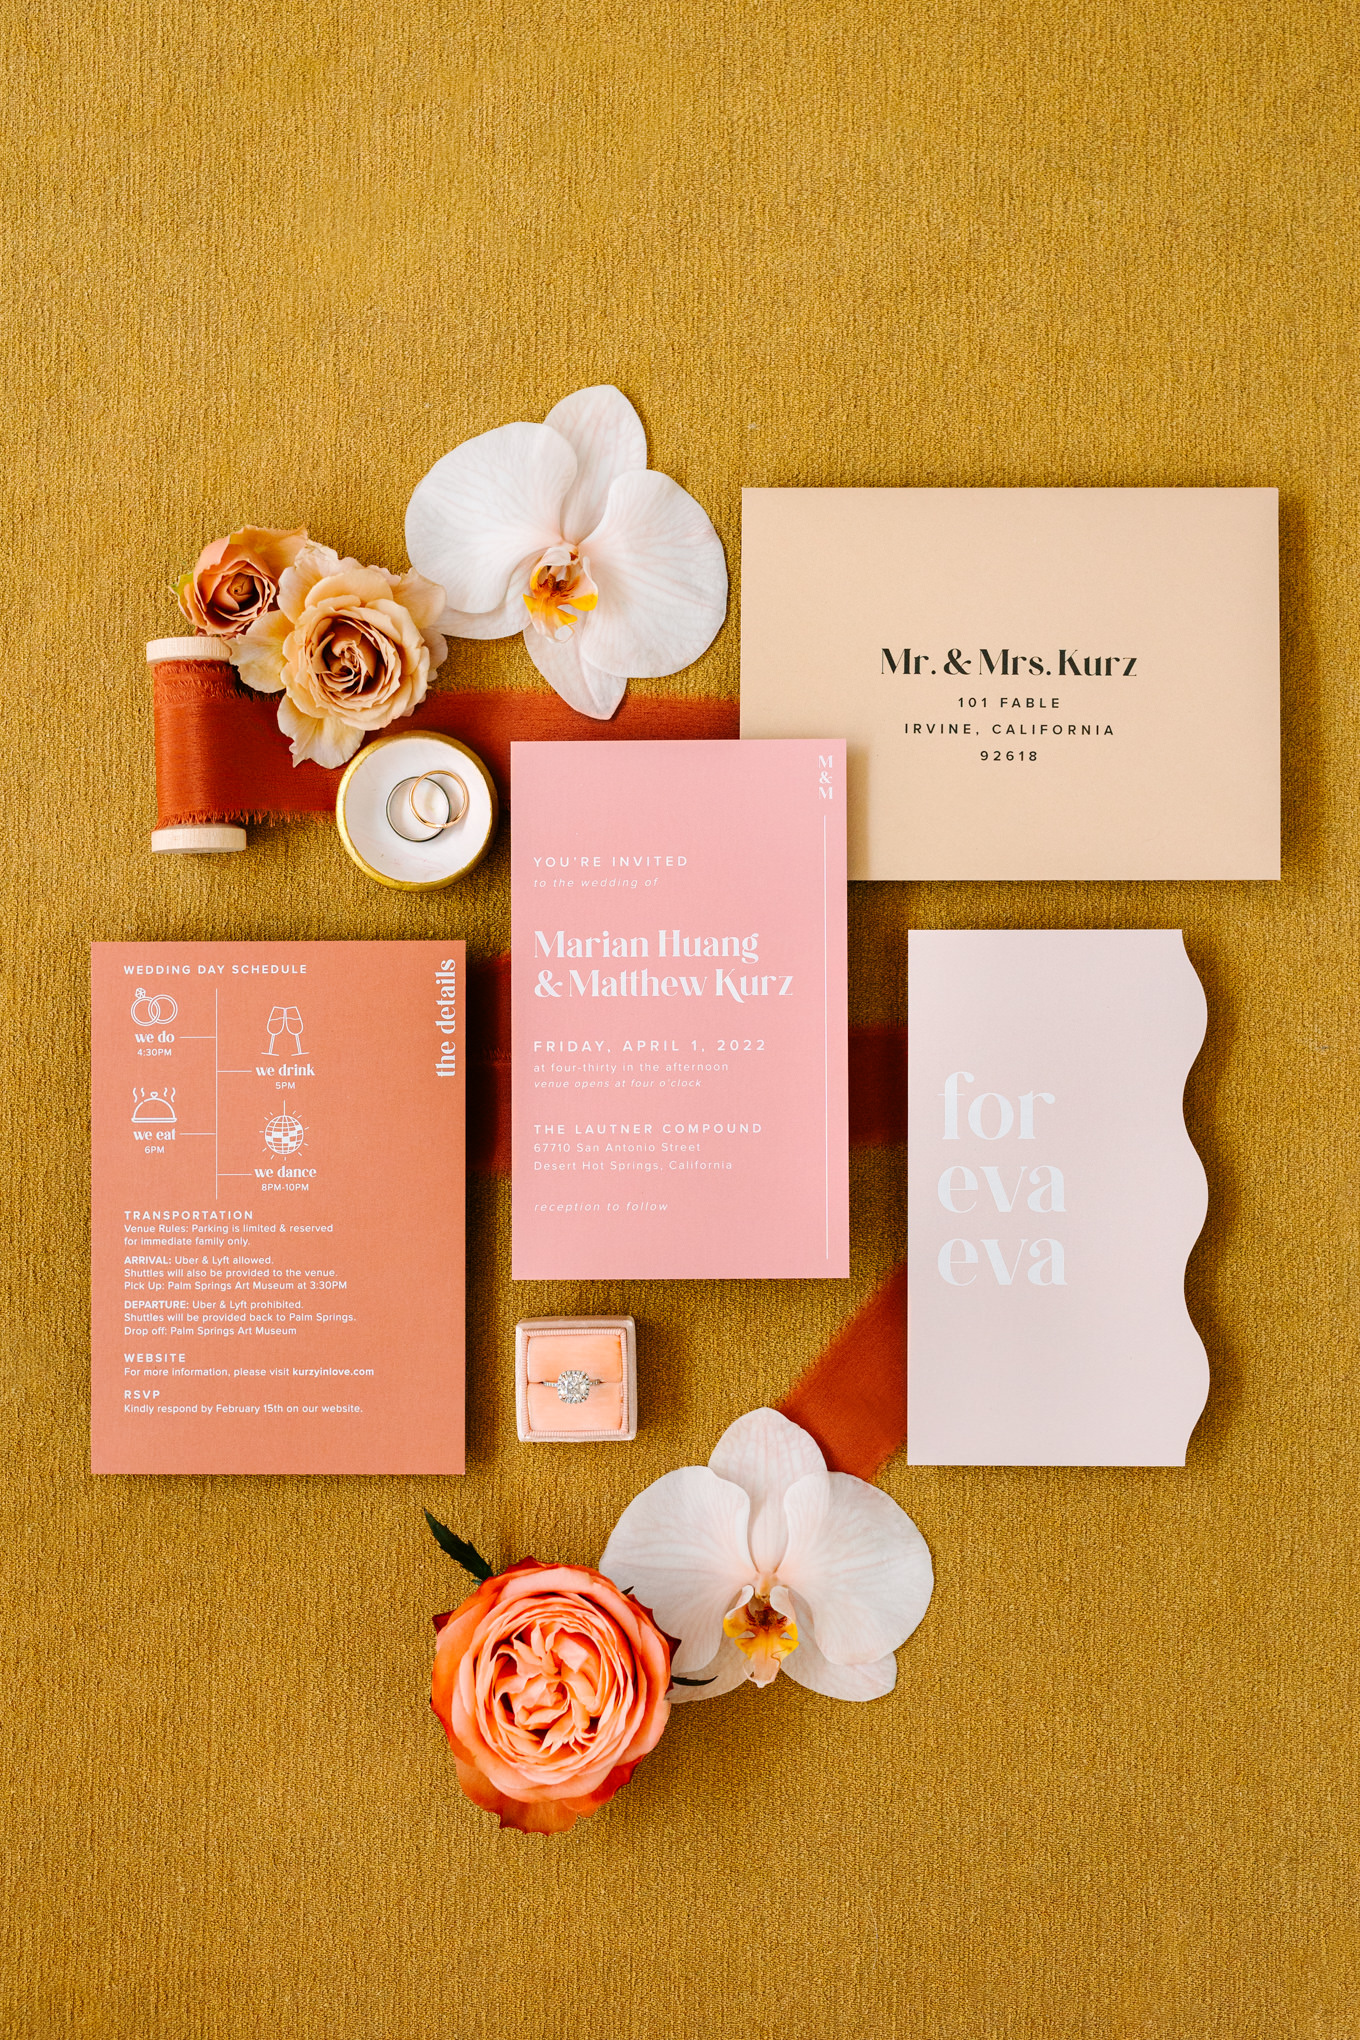 Pink and orange wedding invitation suite | Pink and orange Lautner Compound wedding | Colorful Palm Springs wedding photography | #palmspringsphotographer #palmspringswedding #lautnercompound #southerncaliforniawedding  Source: Mary Costa Photography | Los Angeles